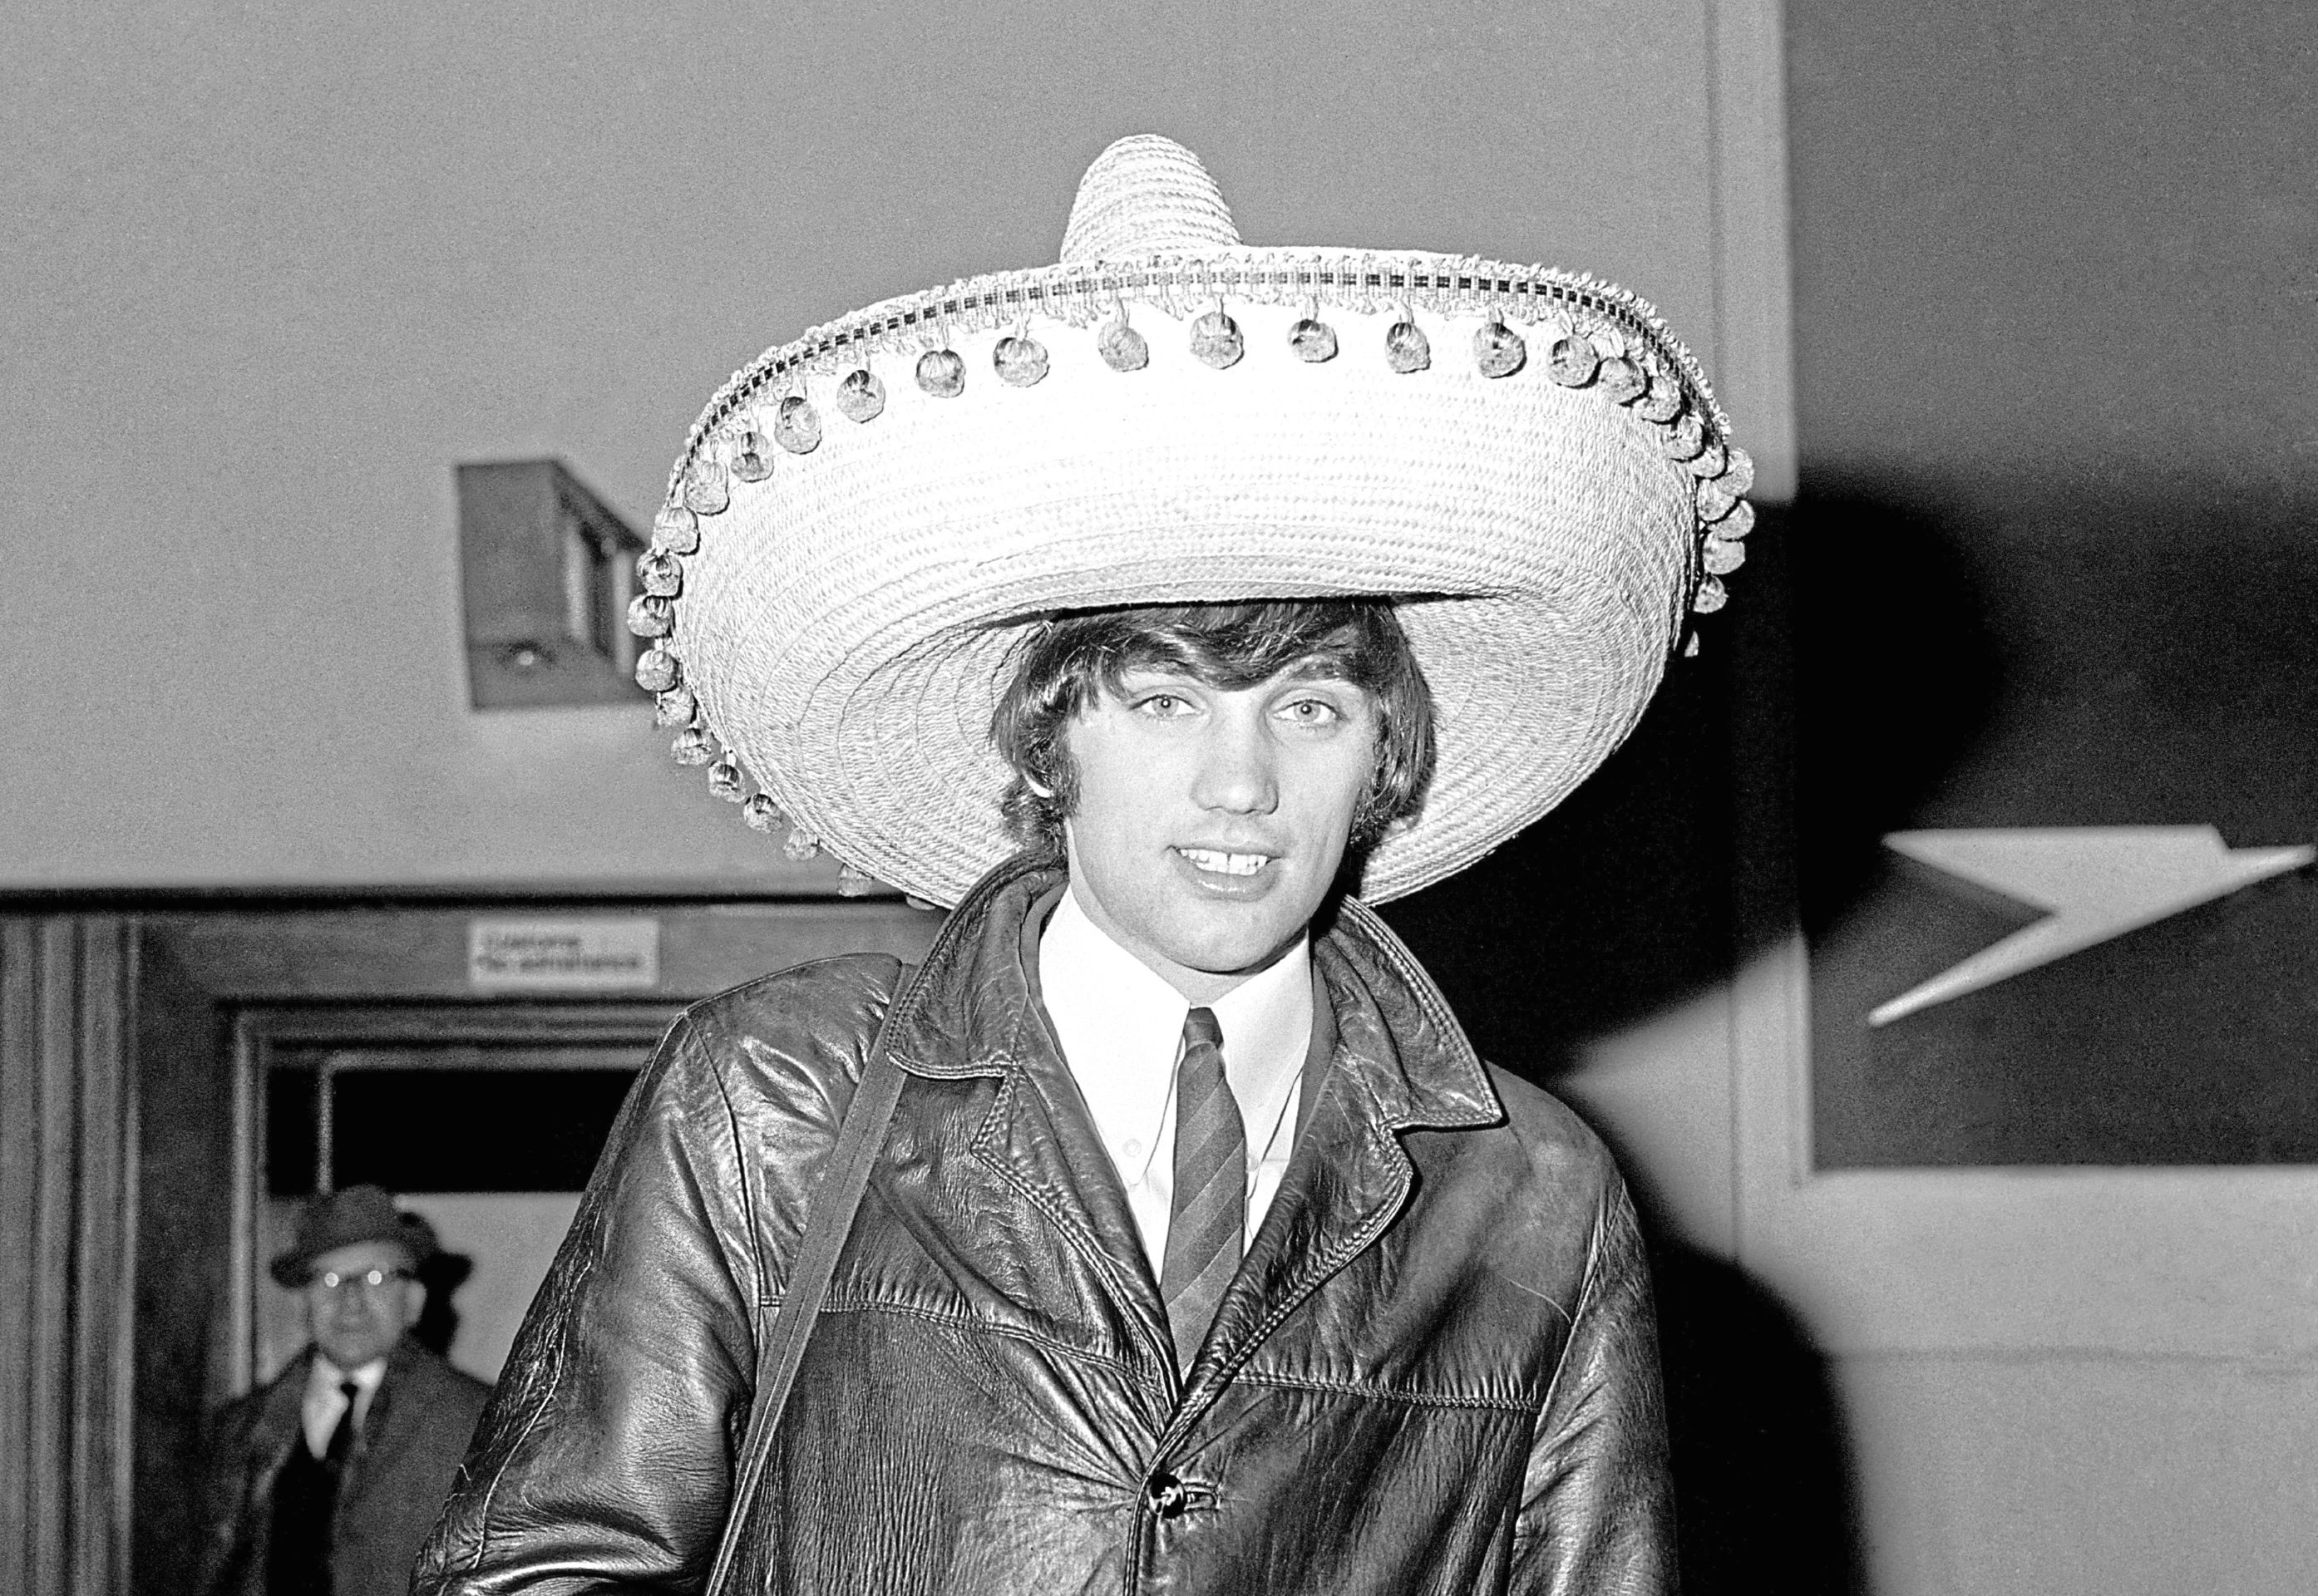 Manchester United footballer George Best wearing a Souvenir Sombrero on his return to London airport following United's defeat of Benfica 5-1 in the second leg of the European Cup quarter final football match. Best scored United's first two goals.